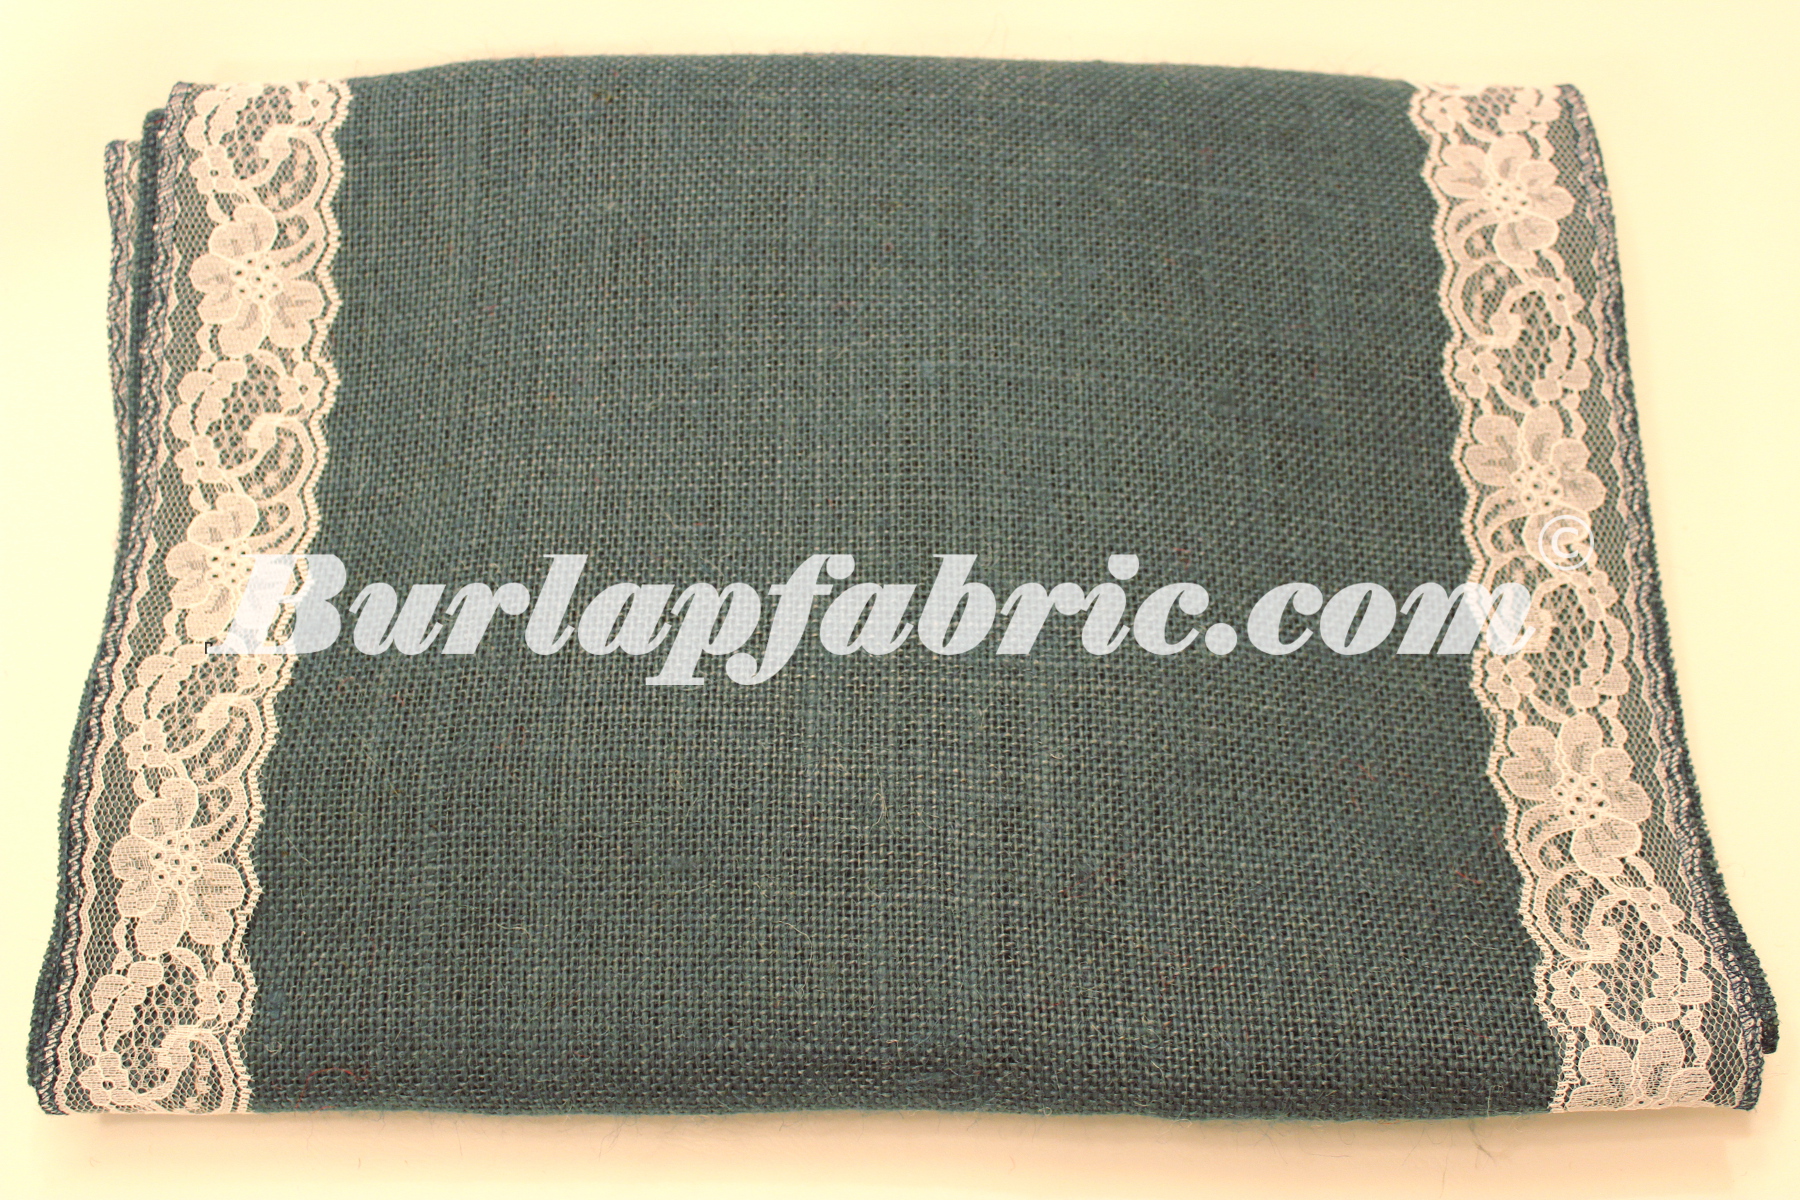 14" Navy Blue Burlap Runner with 2" White Lace Borders - Click Image to Close